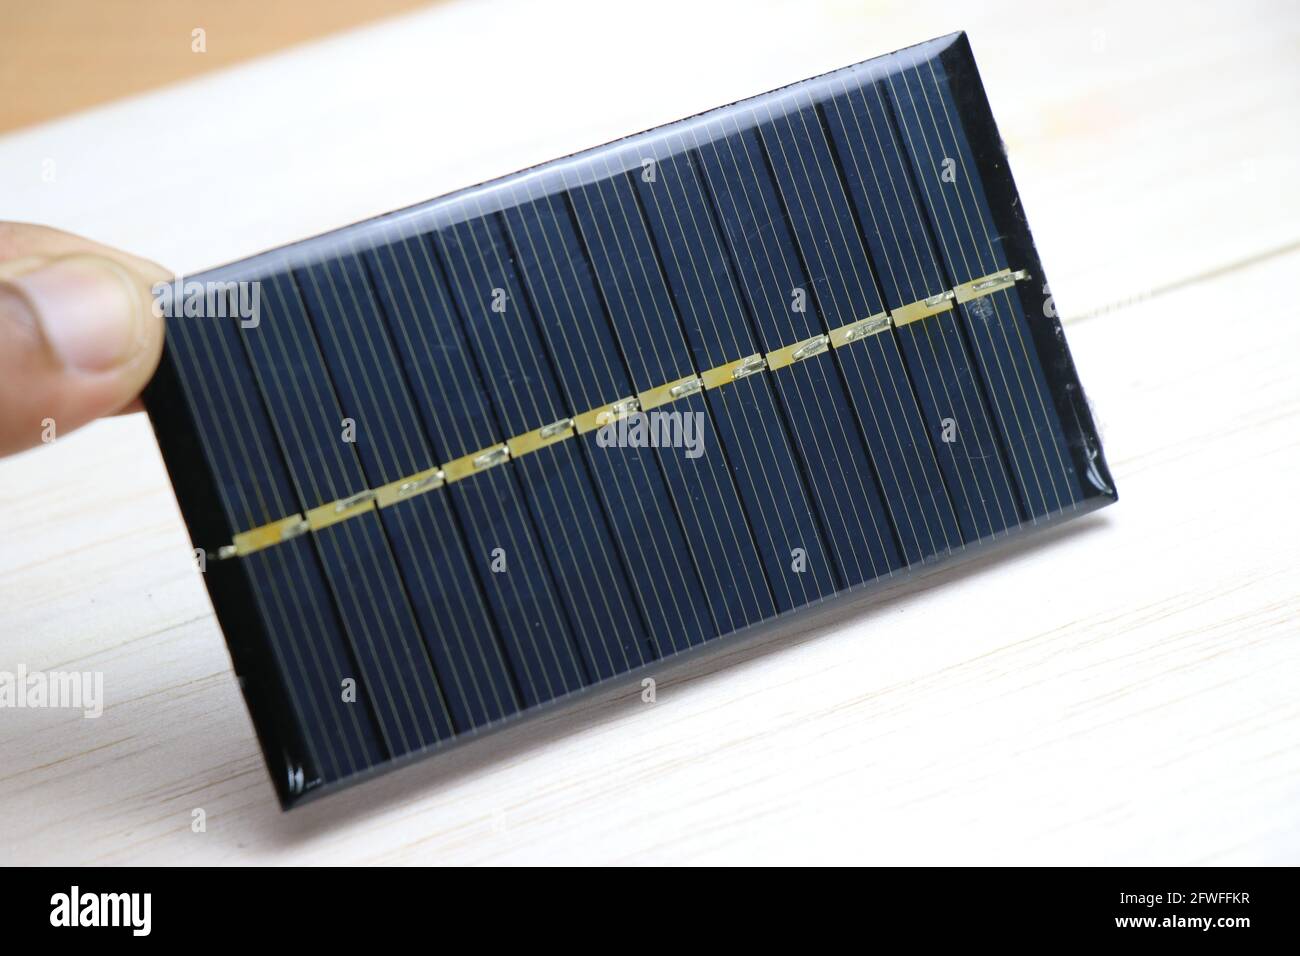 Mini solar panel also called as mini solar cell which is very small in size held in hand which produces electricity when exposed to sunlight Stock Photo